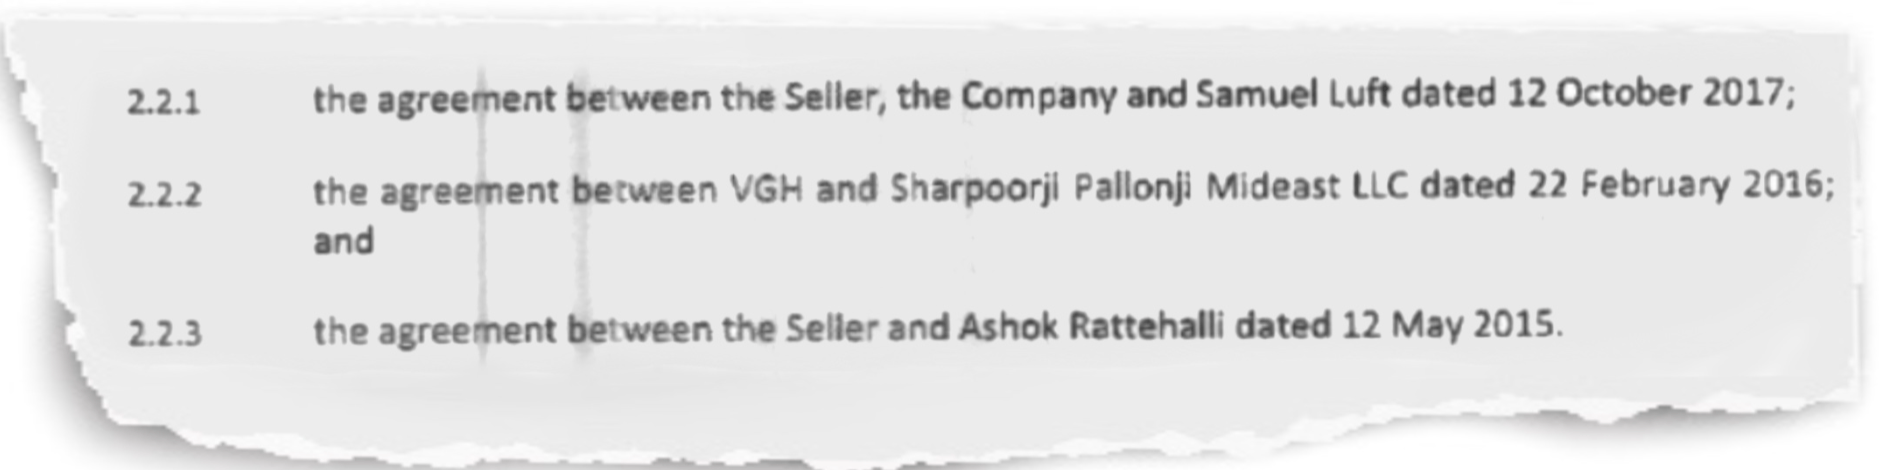 Excerpt from the Share Purchase Agreement referring to persons with rights over shares in VGH ("encumbrances")